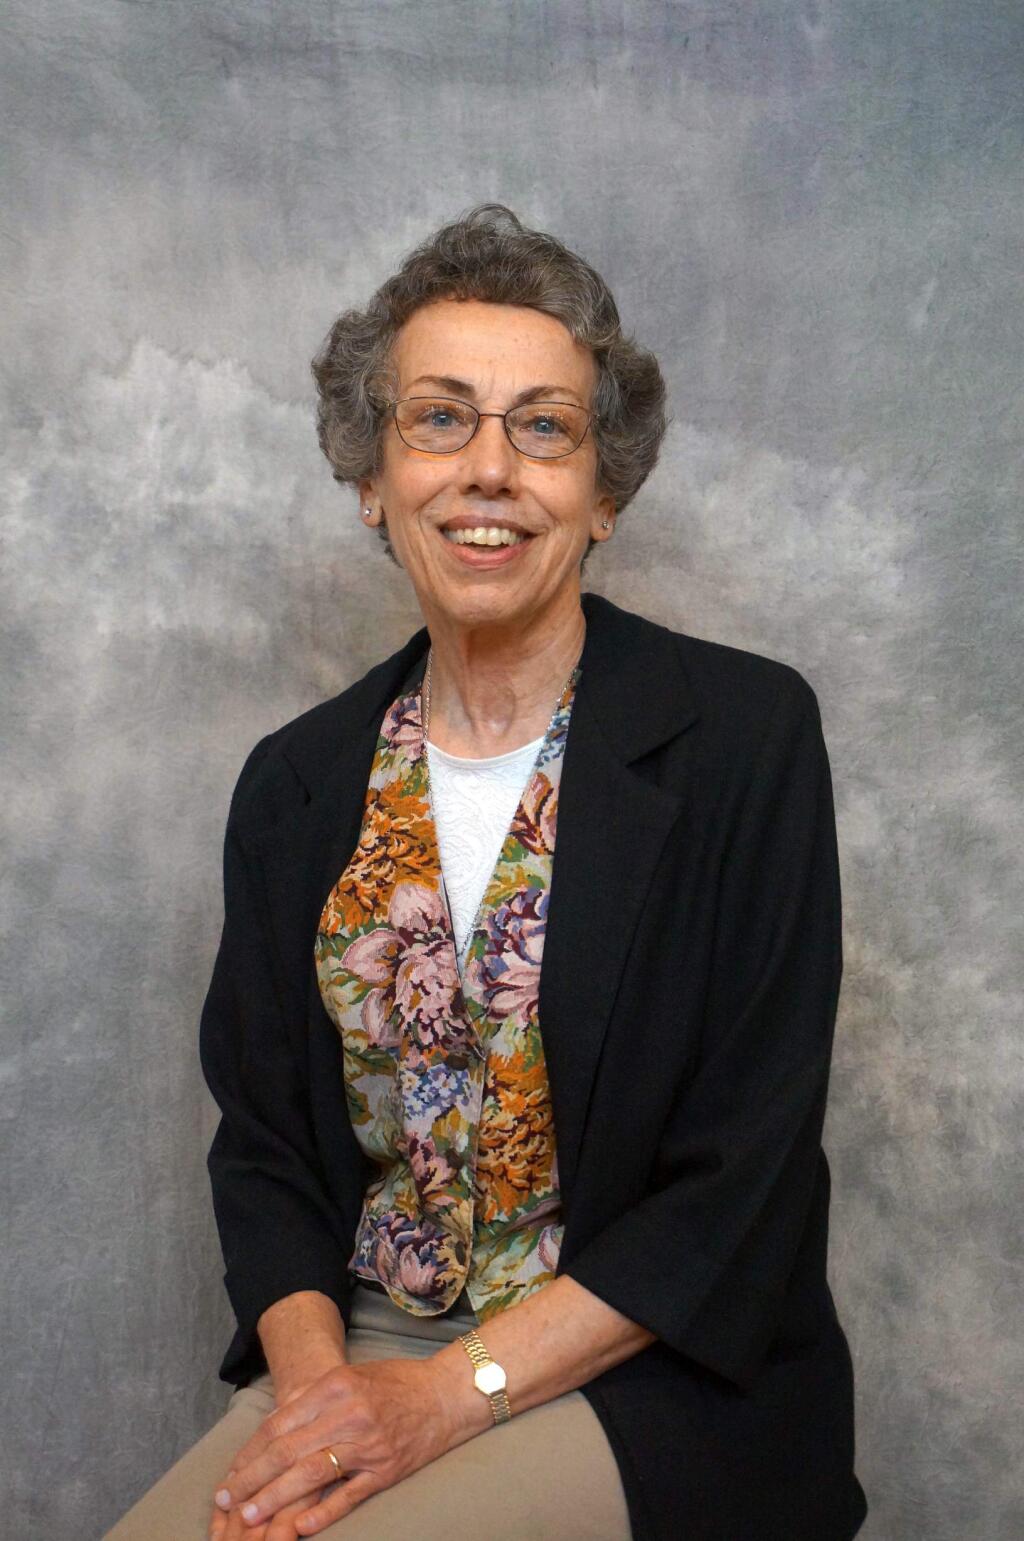 This 2015 photo provided by the School Sisters of St. Francis shows Sister Margaret Held. Sister Paula Merrill and Held, two nuns who worked as nurses and helped the poor in rural Mississippi, were found slain in their home and there were signs of a break-in and their vehicle was missing, officials said Thursday, Aug. 25, 2016. (Michael O'Loughlin/School Sisters of St. Francis via AP)